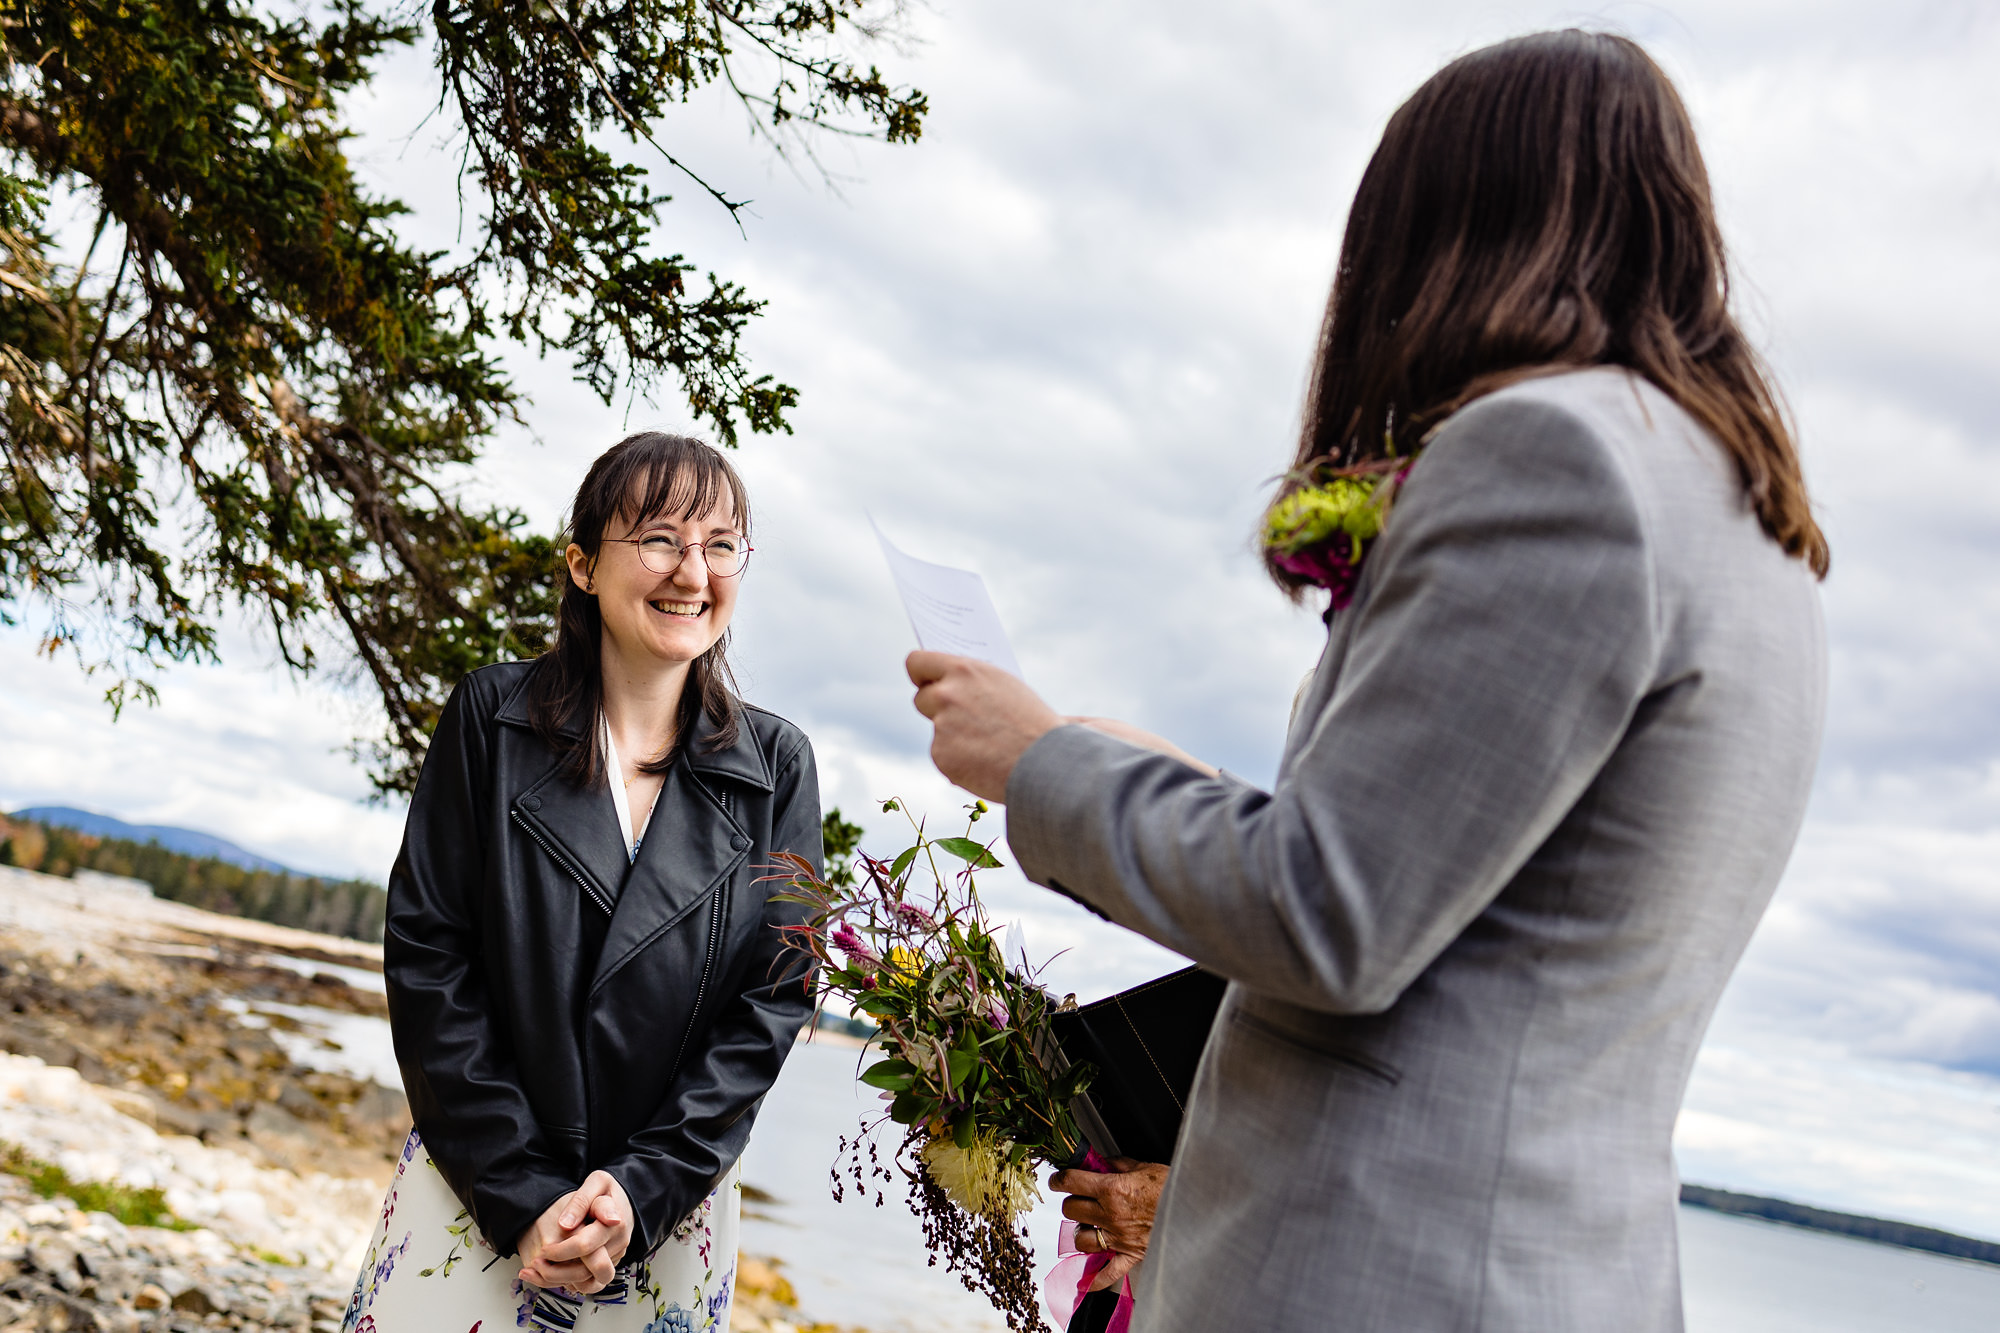 Seawall elopement ceremony in Acadia National Park